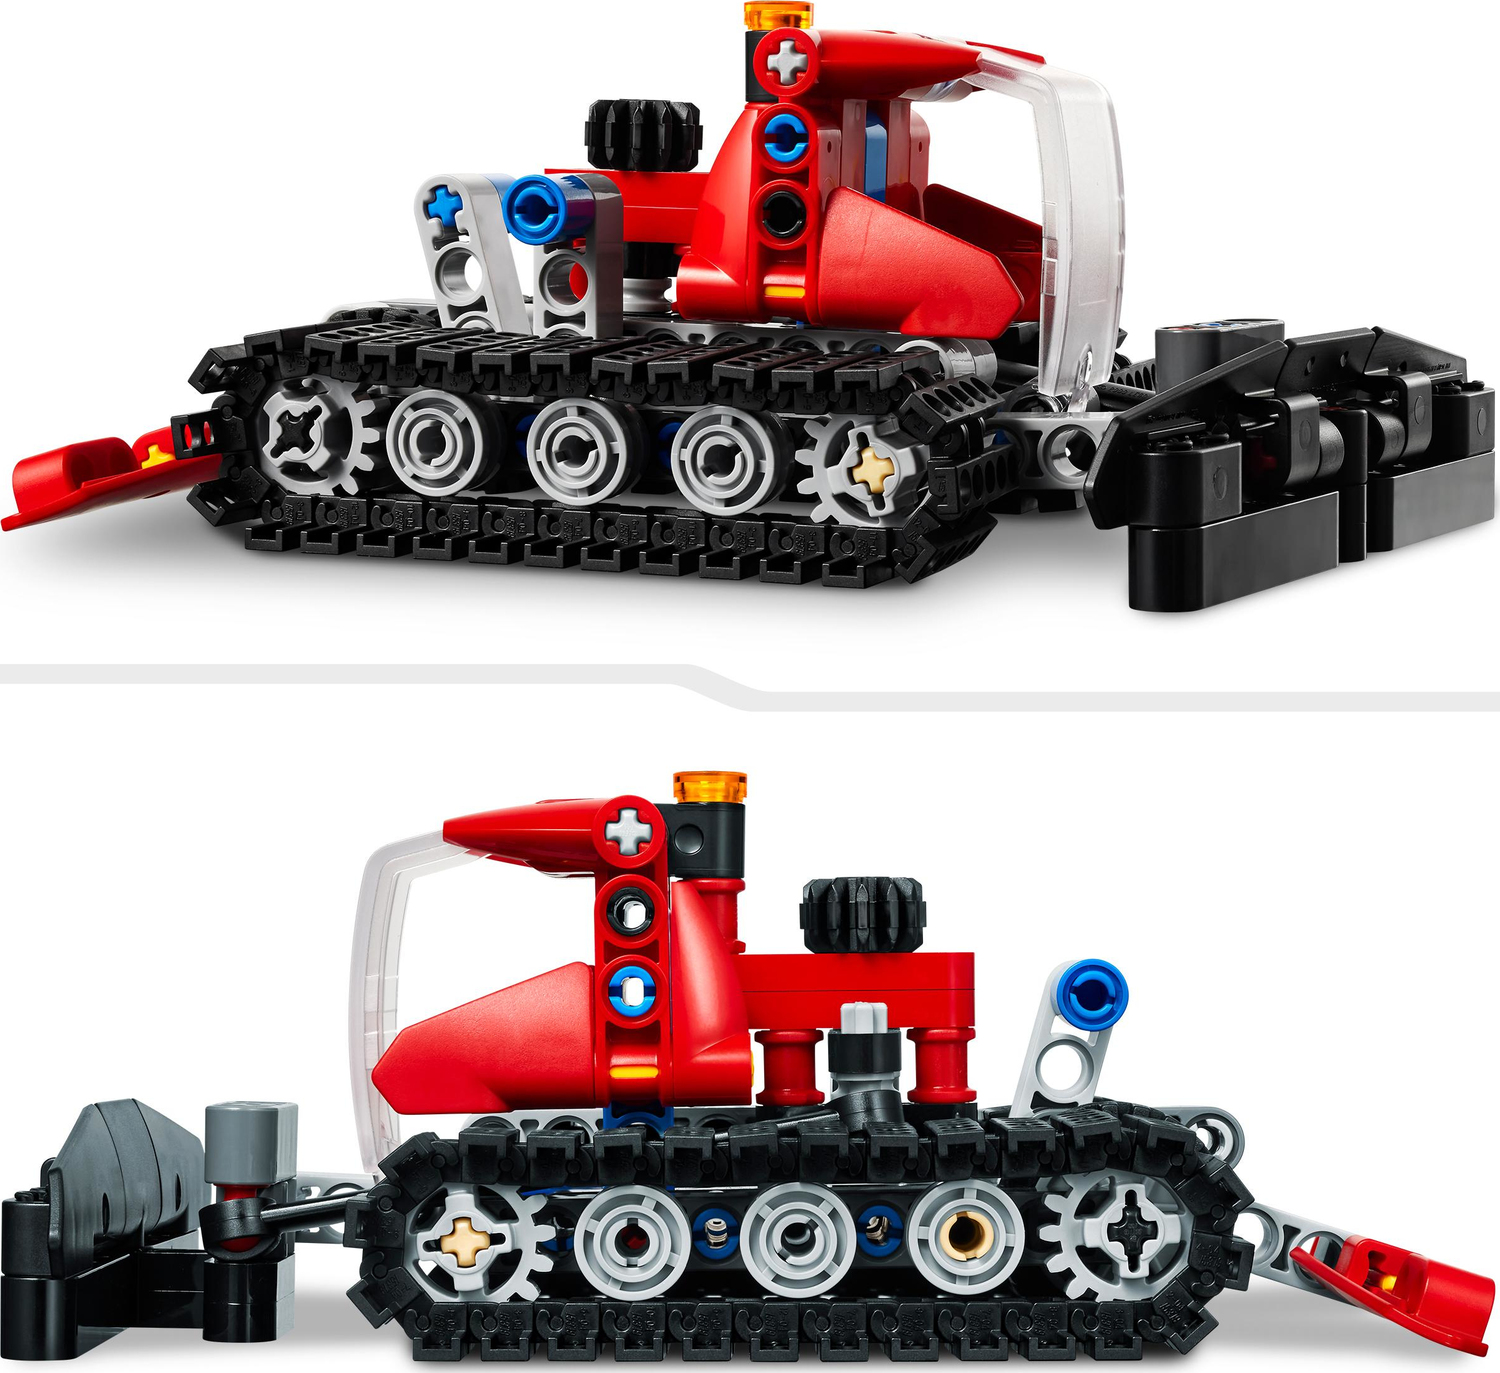 Technic: Groomer 2in1 Building Set - Imagine That Toys